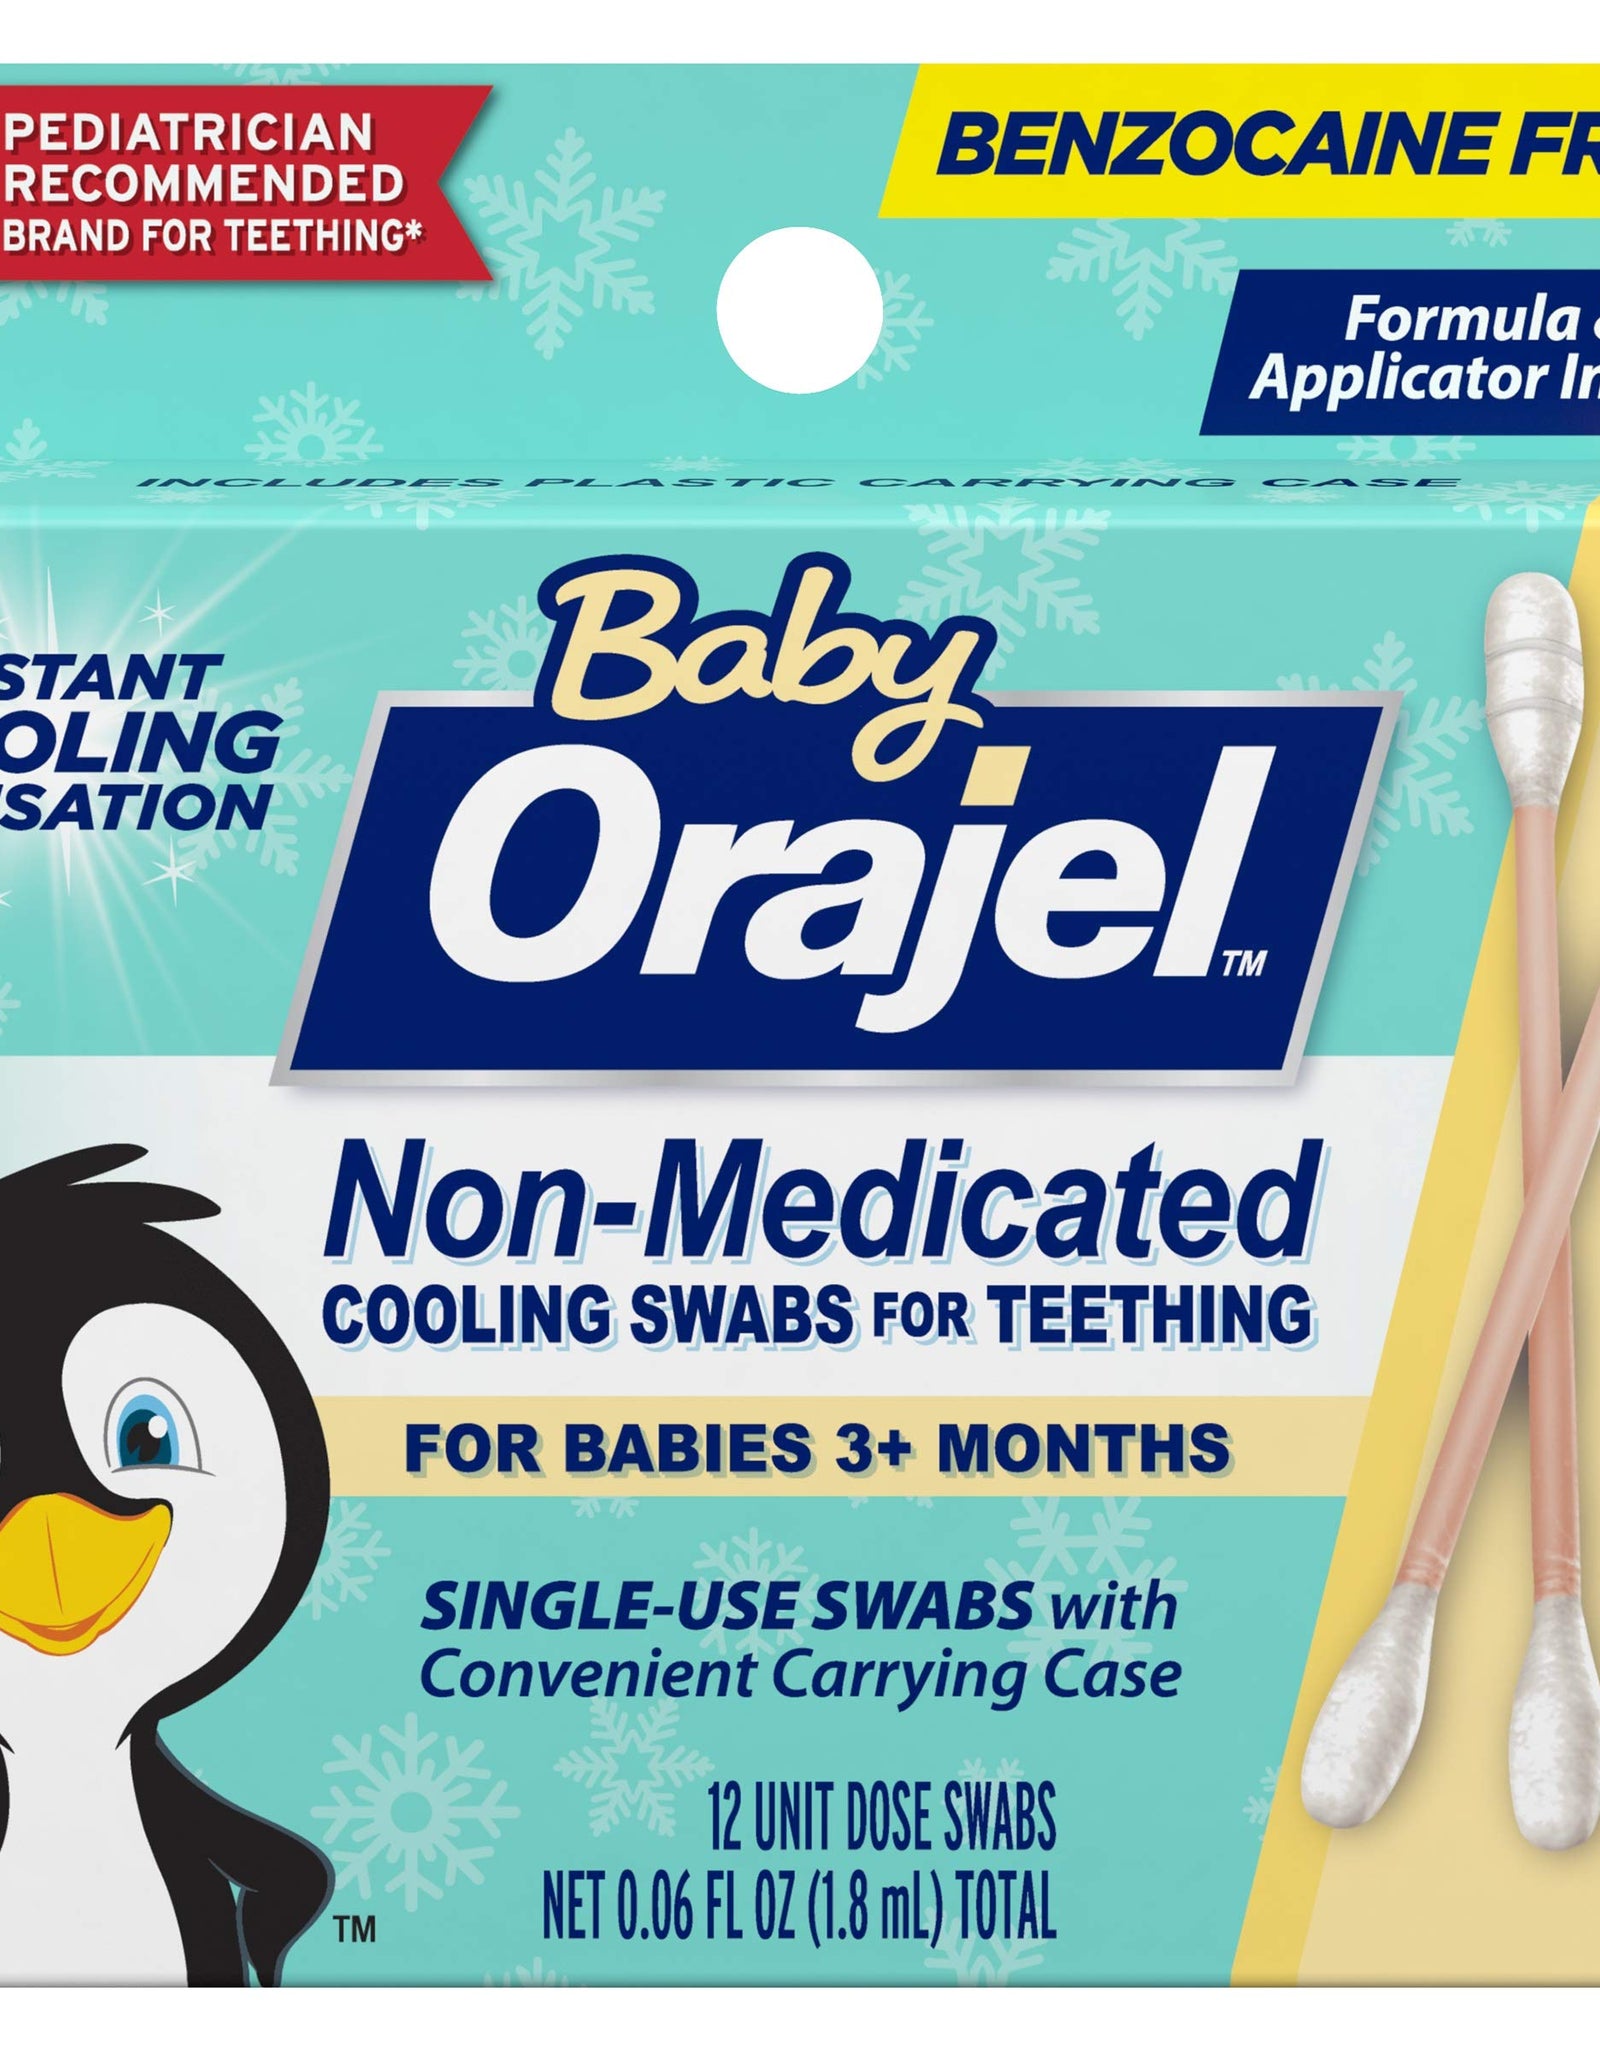 Baby Orajel Non-Medicated Cooling Swabs for Teething, 12 Unit Dose Swabs